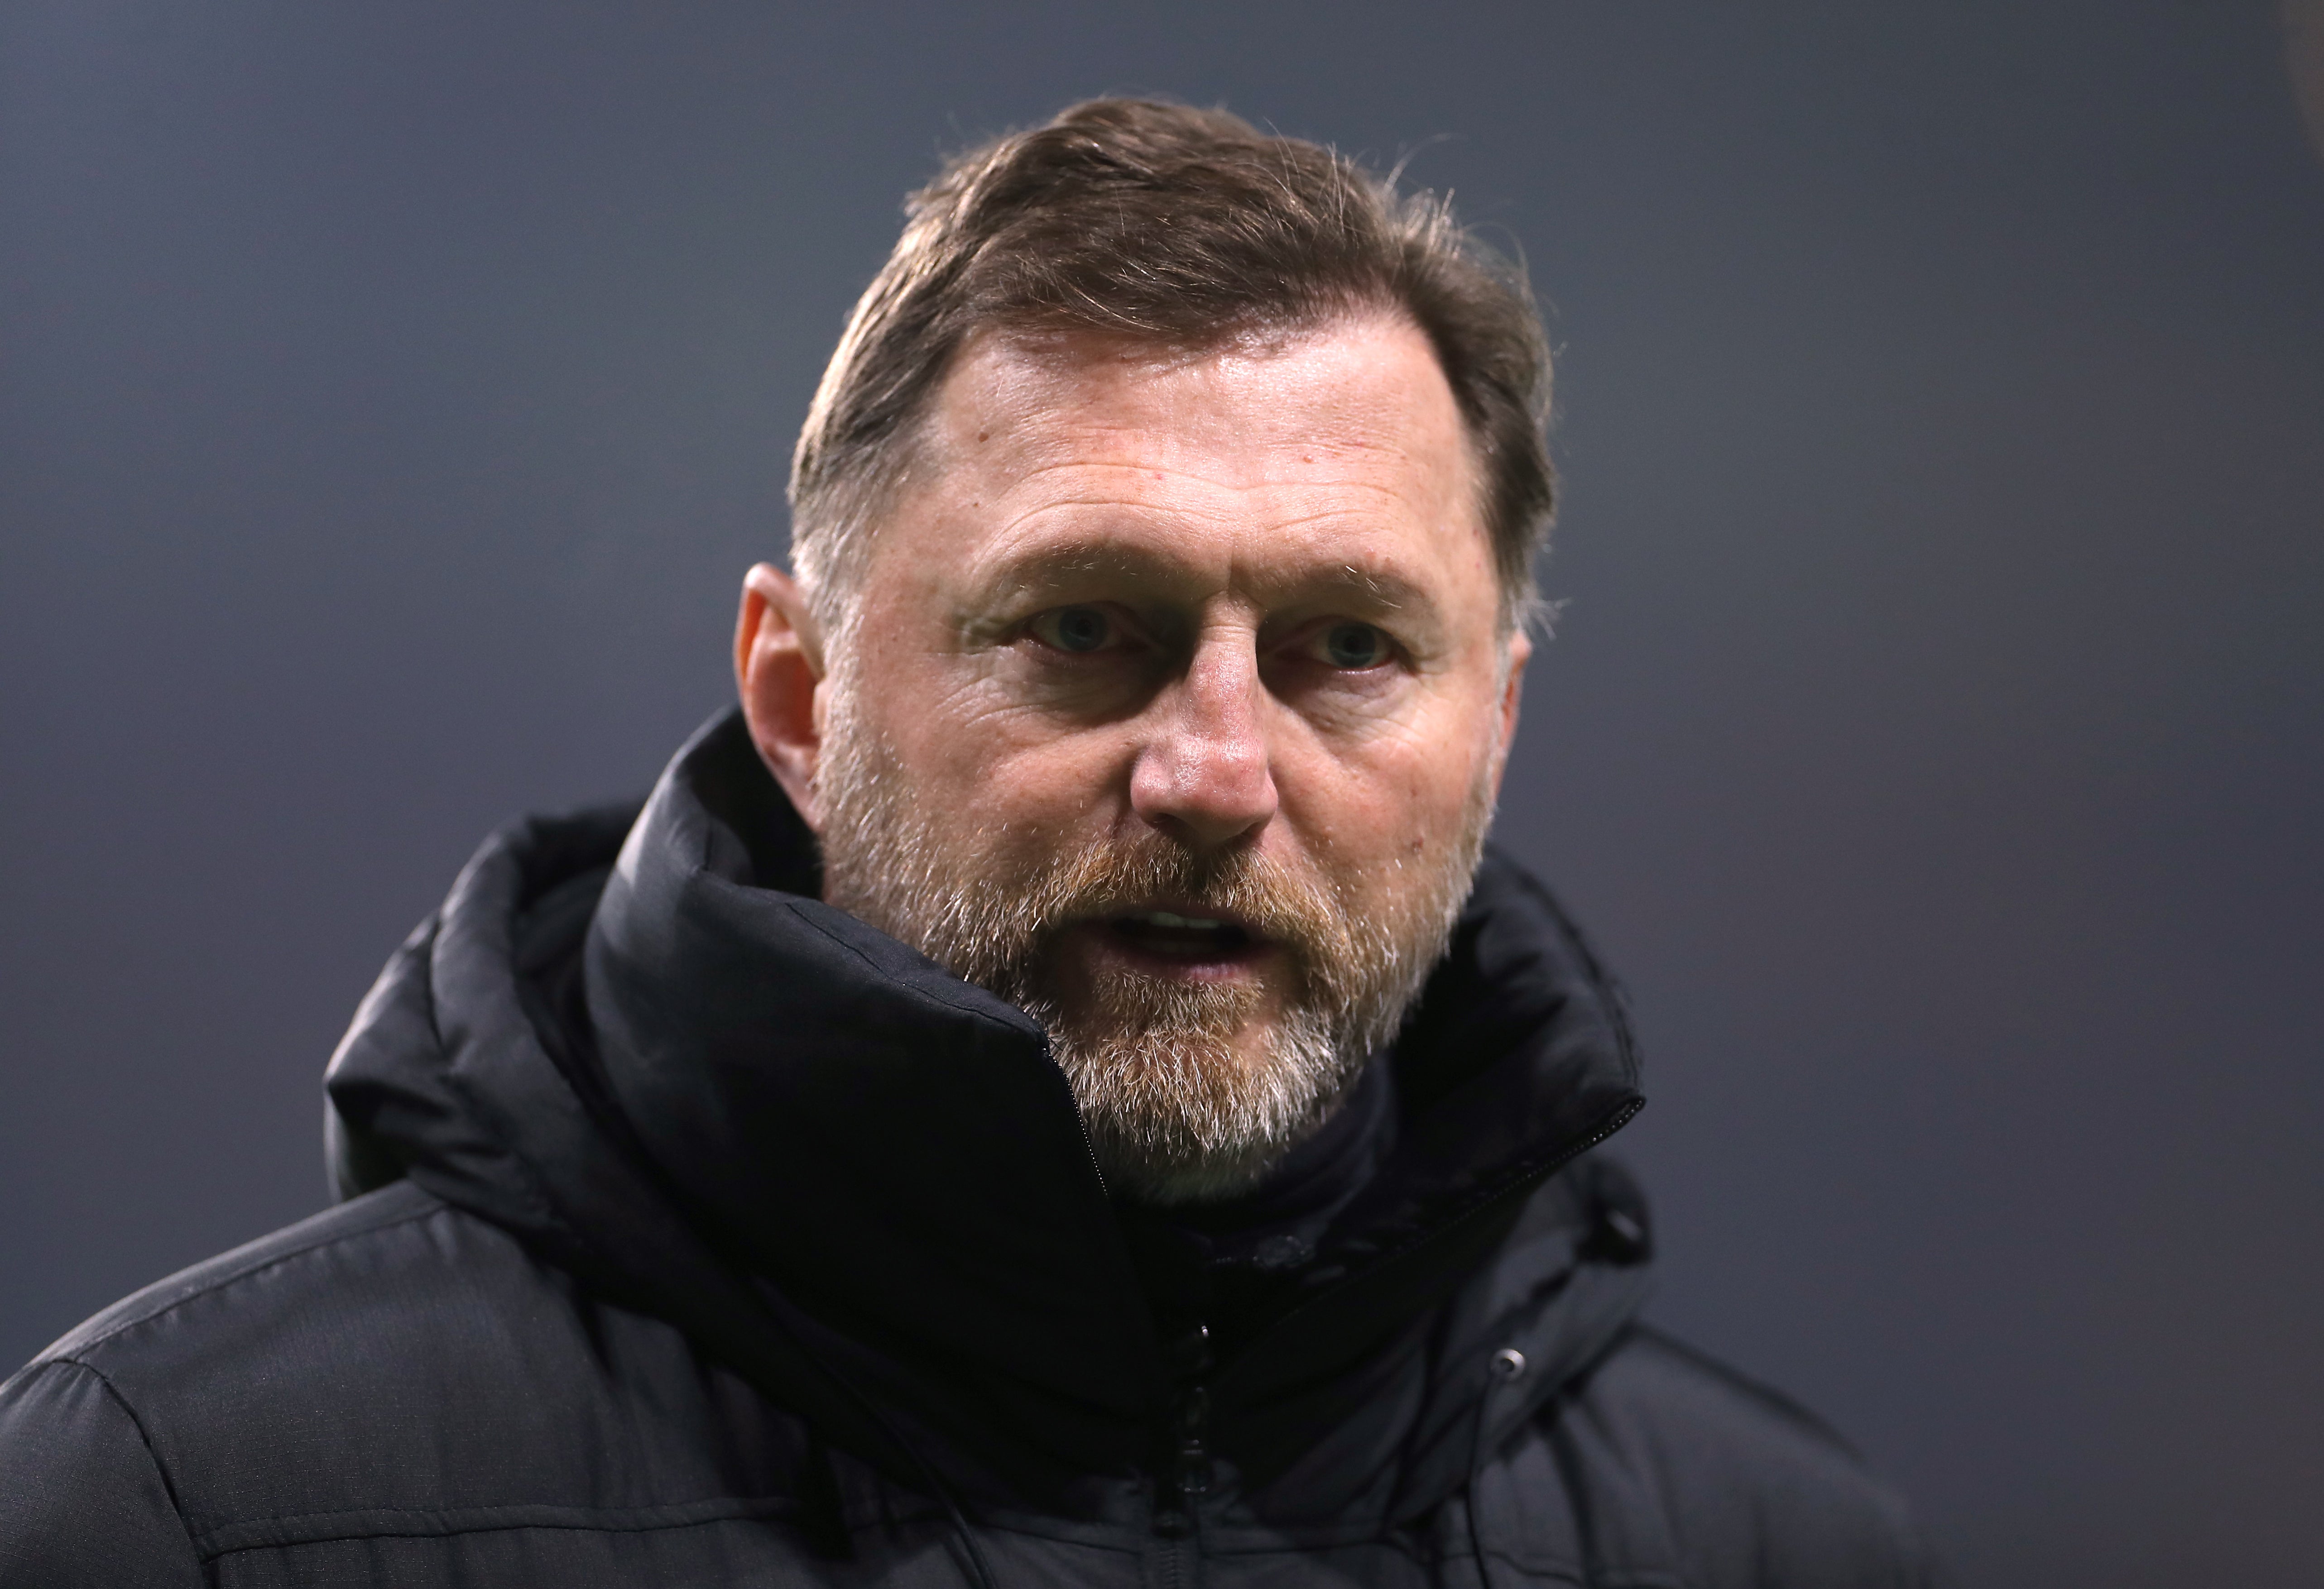 Ralph Hasenhuttl believes Southampton have a “big chance” to finish in the top half of the Premier League this season (Bradley Collyer/PA)